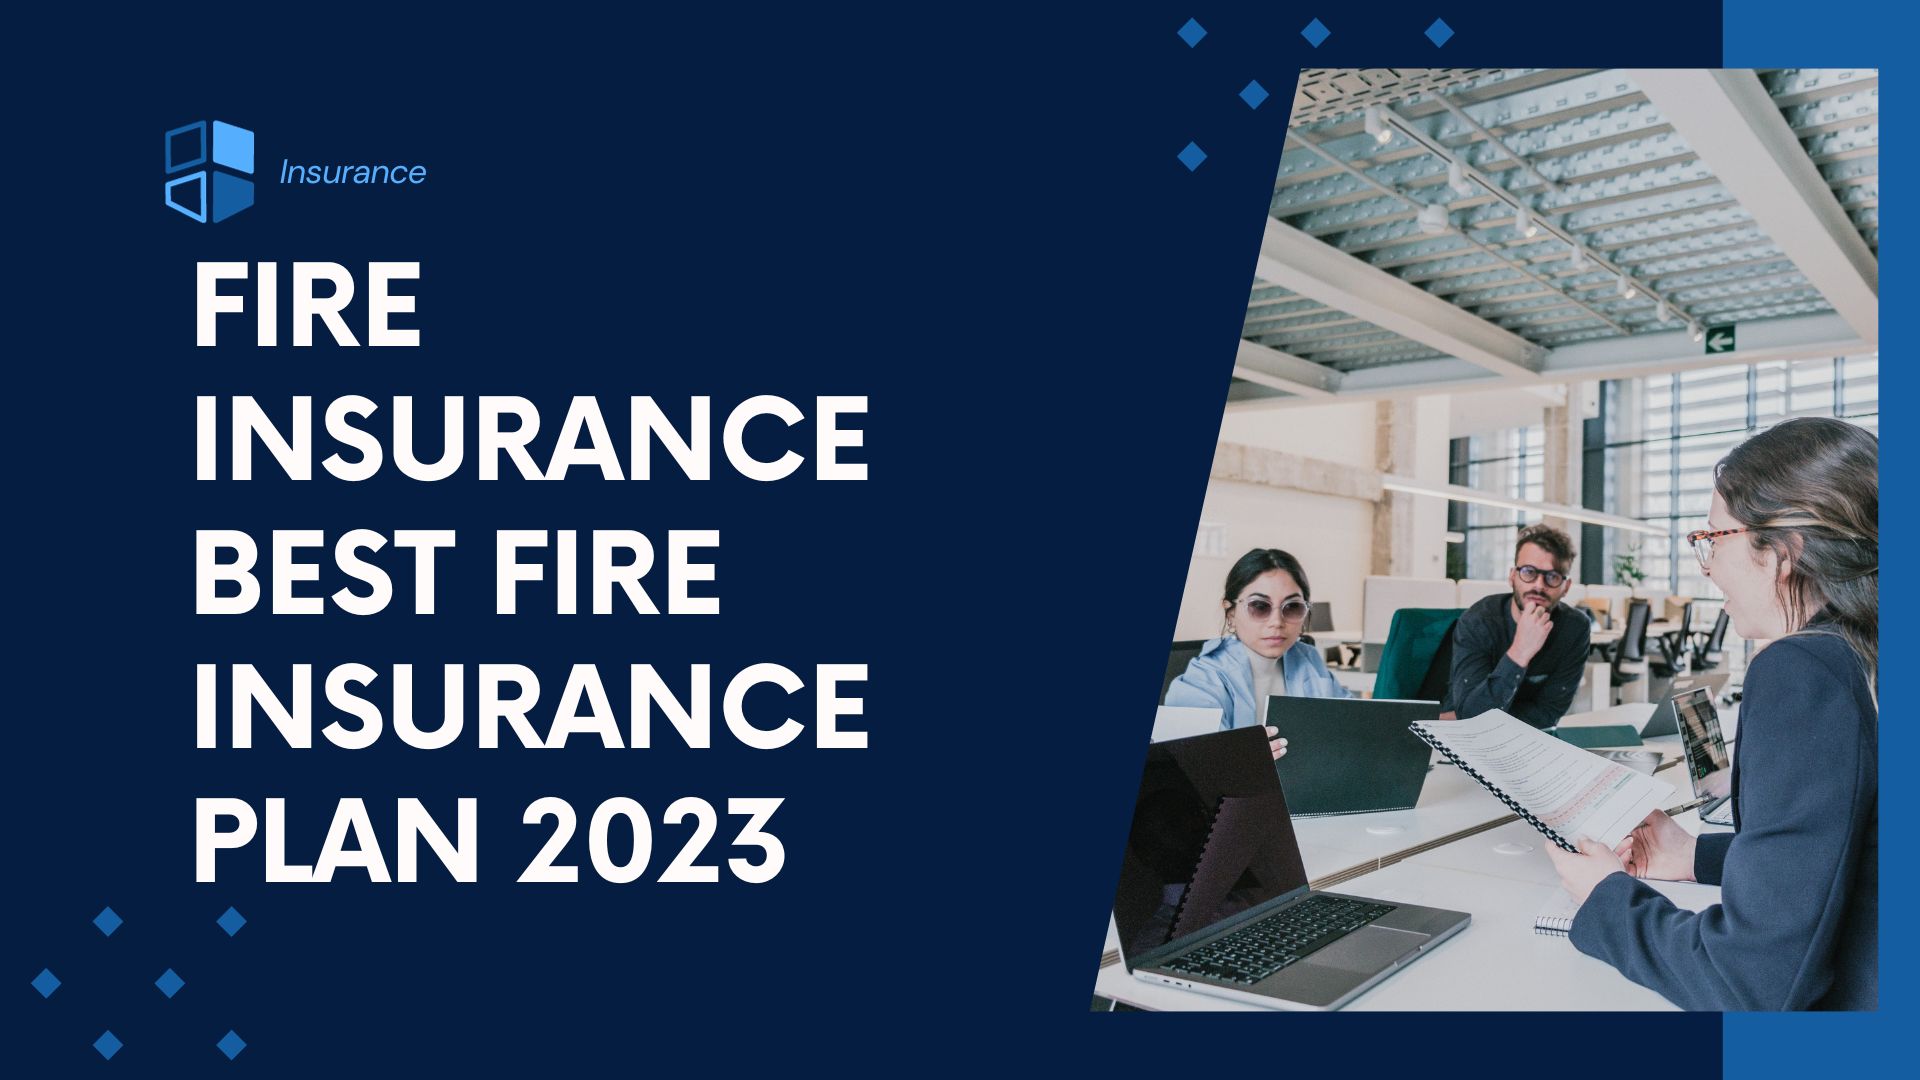 You are currently viewing Best 1 Fire Insurance Best Fire Insurance Plan 2023